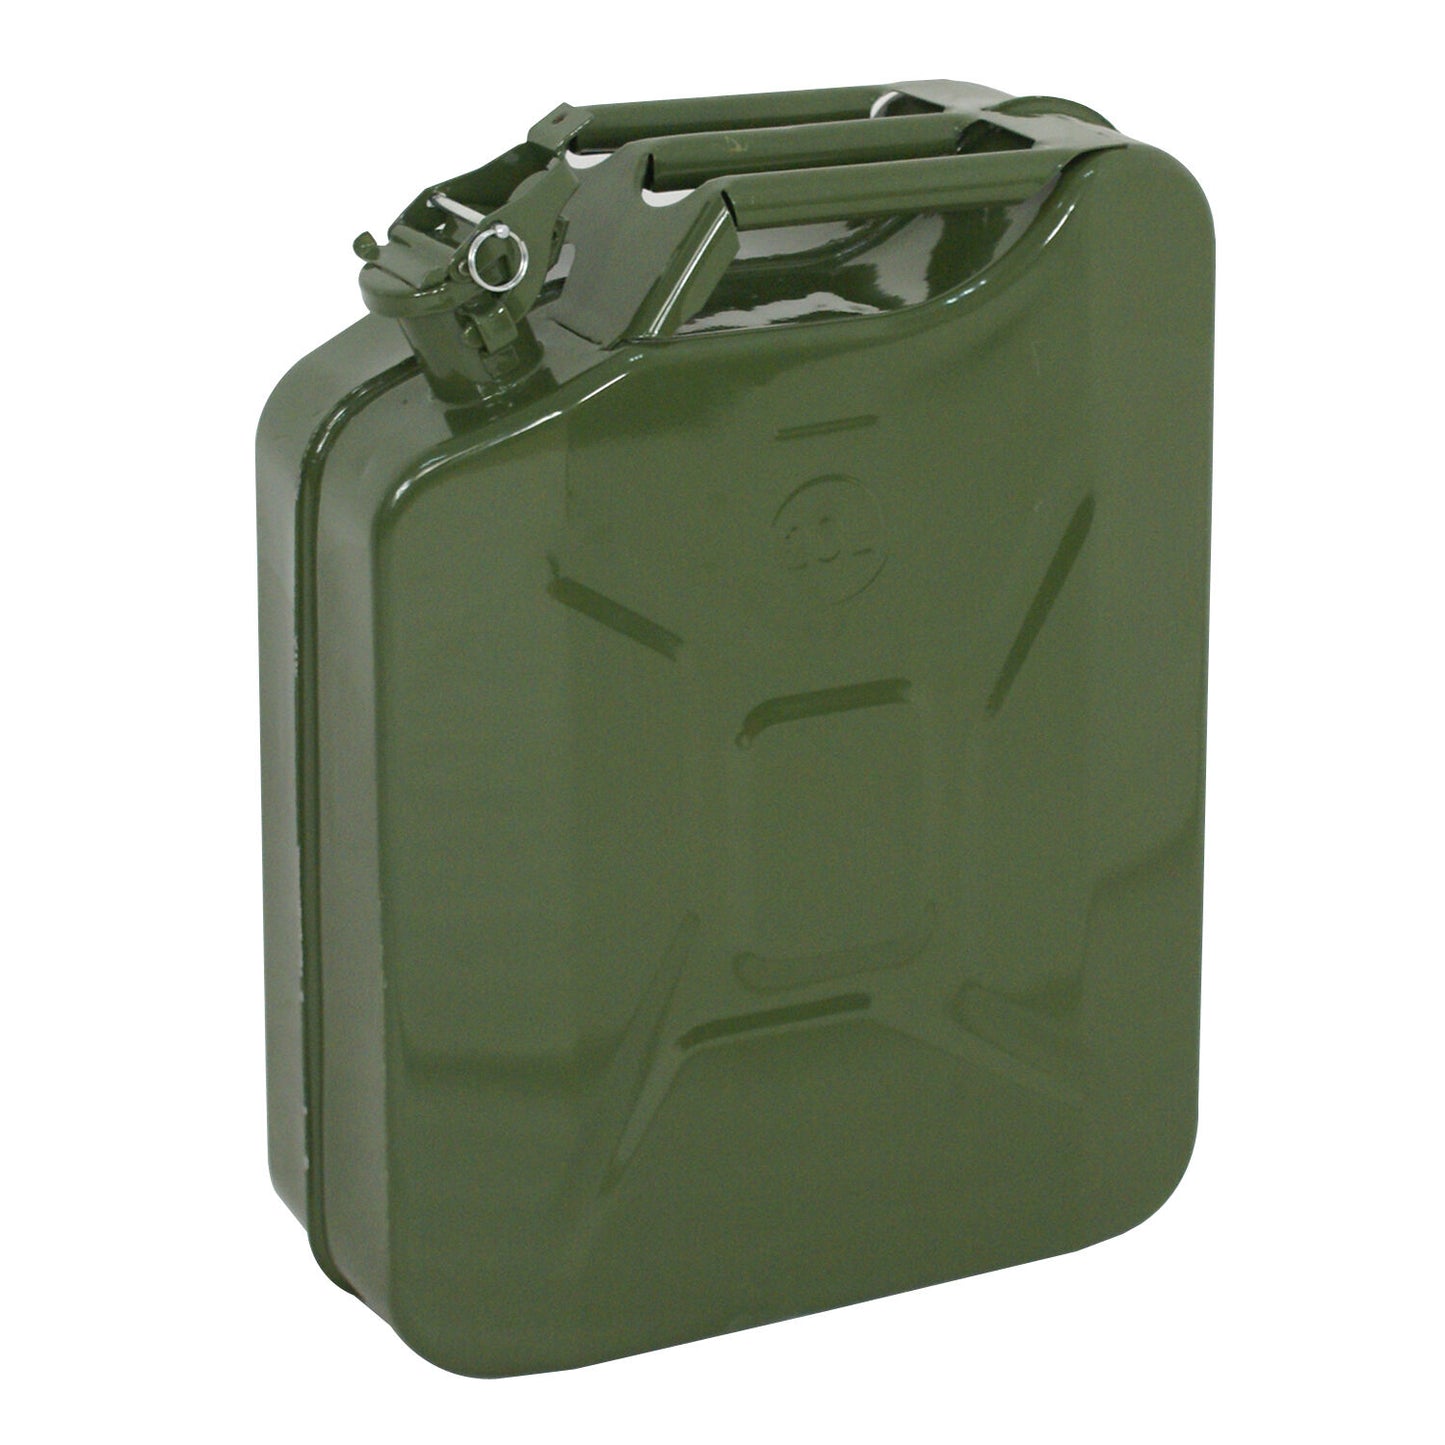 8PCS Jerry Can Green 20L 5 Gallon Backup Steel Tank Gas Gasoline Military Green